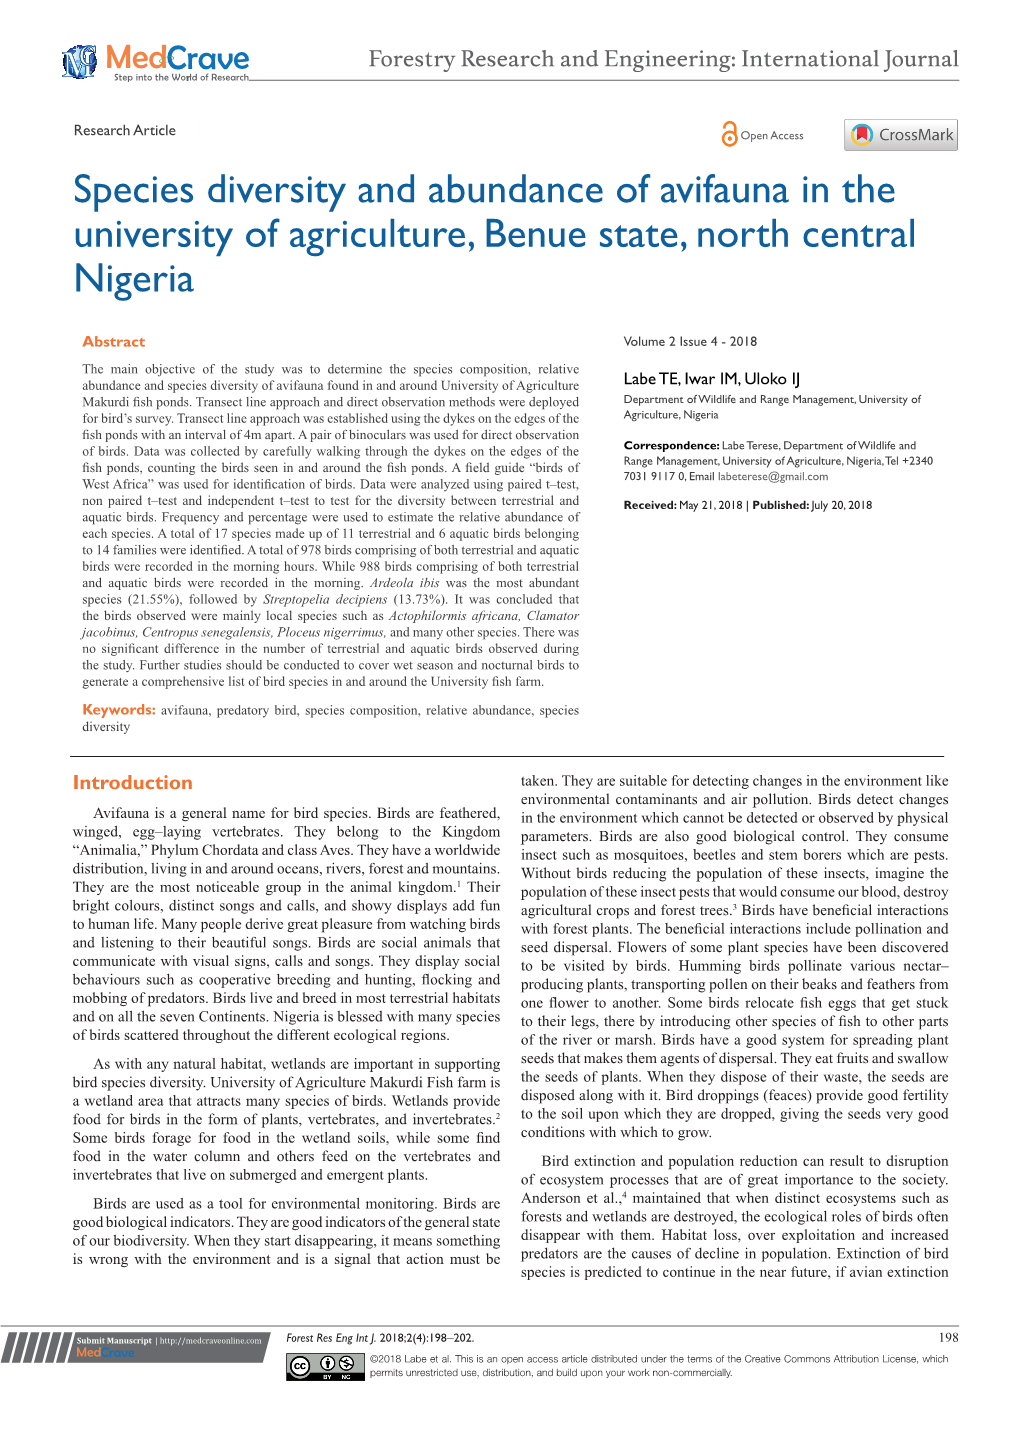 Species Diversity and Abundance of Avifauna in the University of Agriculture, Benue State, North Central Nigeria